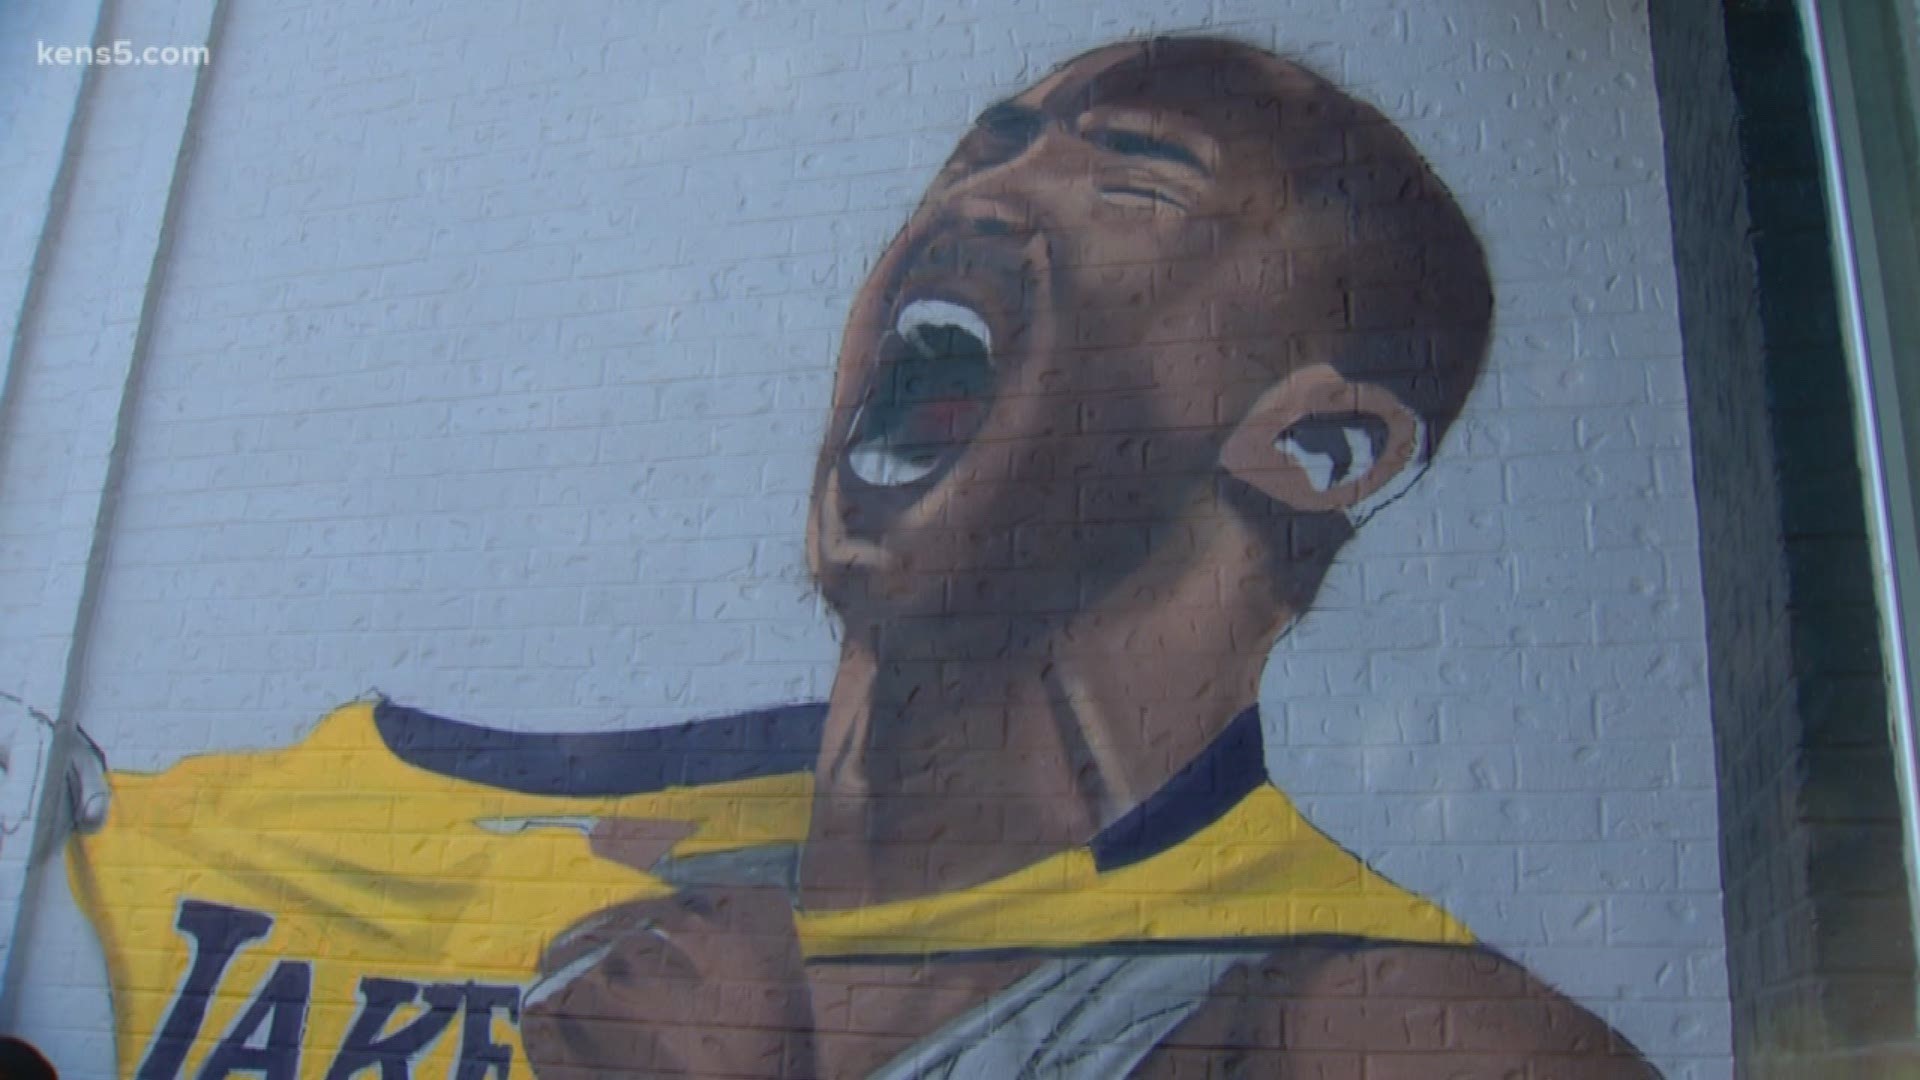 A local San Antonio artist turned his grief into art, creating a mural of Kobe Bryant and giving locals a chance to pay their respects to the basketball legend.